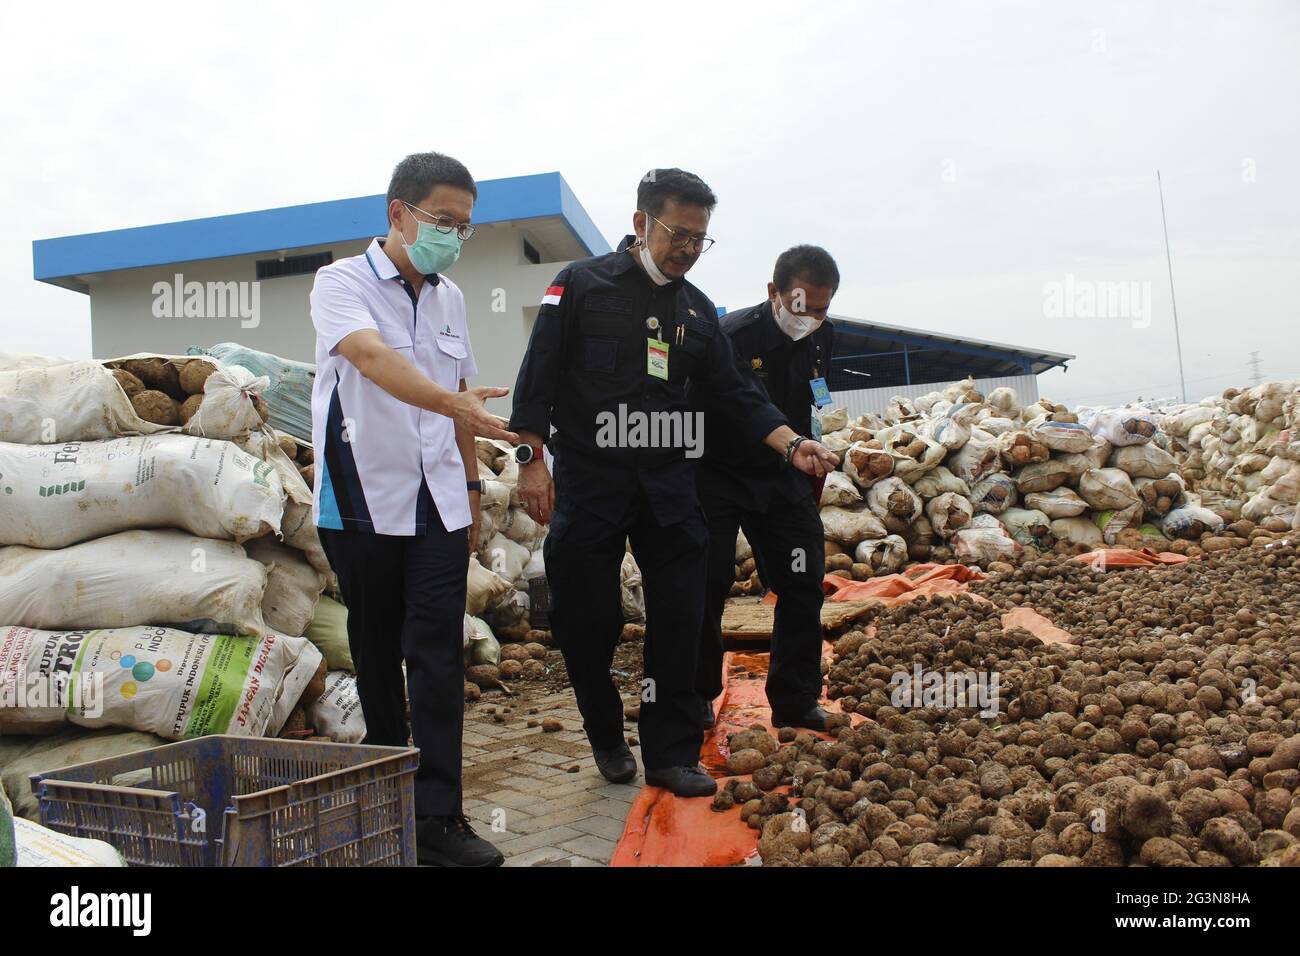 Madiun, Indonesia. 17th June, 2021. Minister of Agriculture of the Republic of Indonesia Syahrul Yasin Limpo (center) inspecting the stock of porang tubers (Amorphophallus muelleri) at the porang processing factory yard in Kuwu Village, Balerejo District, Madiun Regency (Photo by Ajun Ally/Pacific Press) Credit: Pacific Press Media Production Corp./Alamy Live News Stock Photo